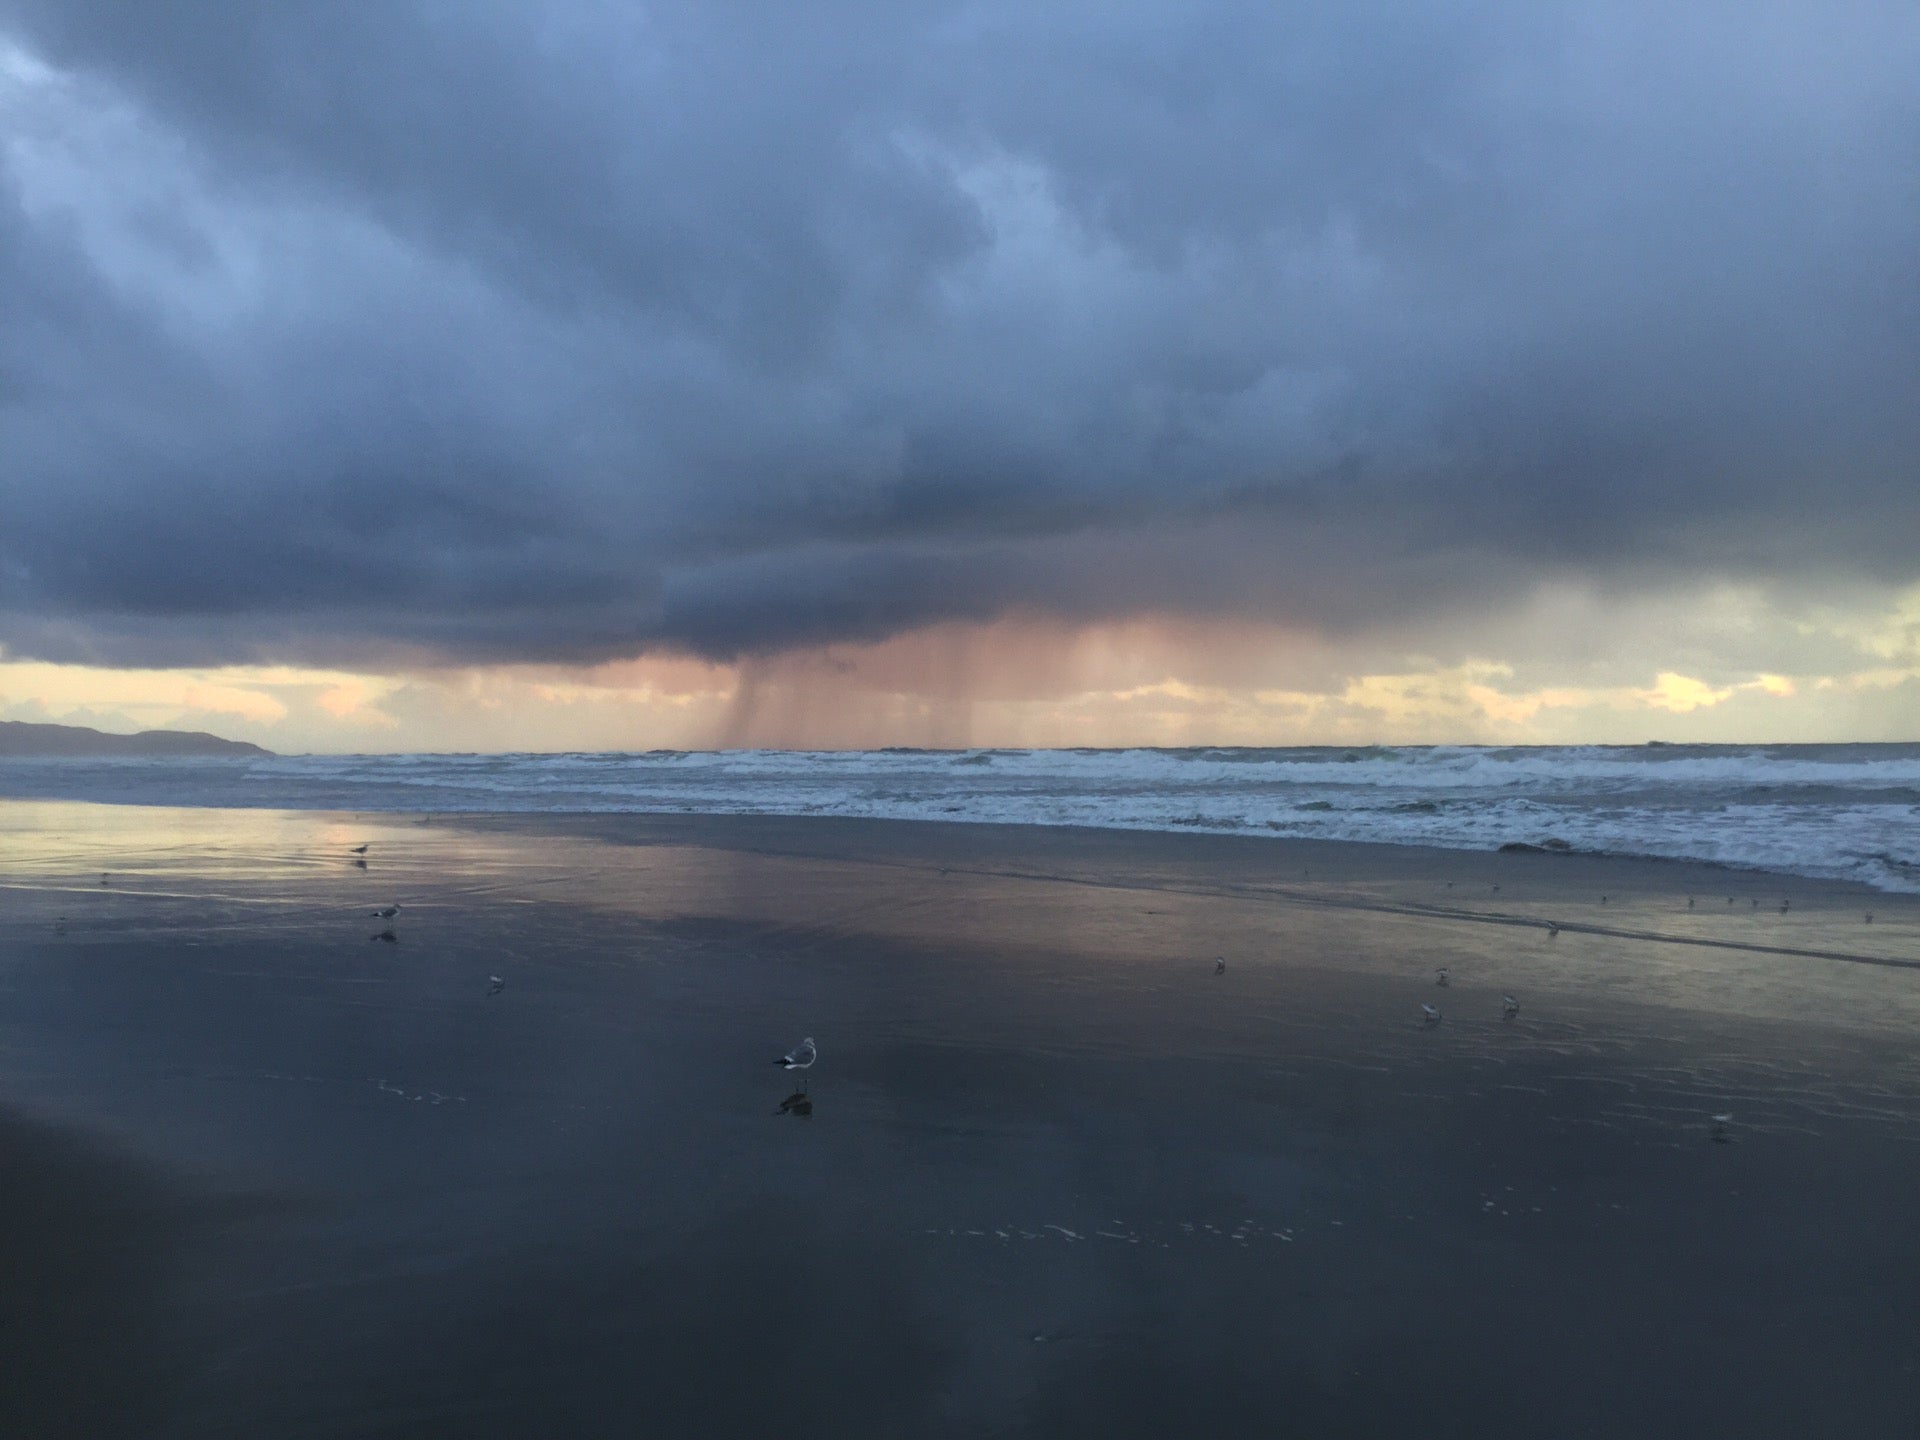 Dramatic Clouds Last Night At Ocean Beach No Sign Of The Setting Sun Except A Distant Orange Glow Under The Clouds Above The Ocean Lighting Up Strands Of Rain Returning To